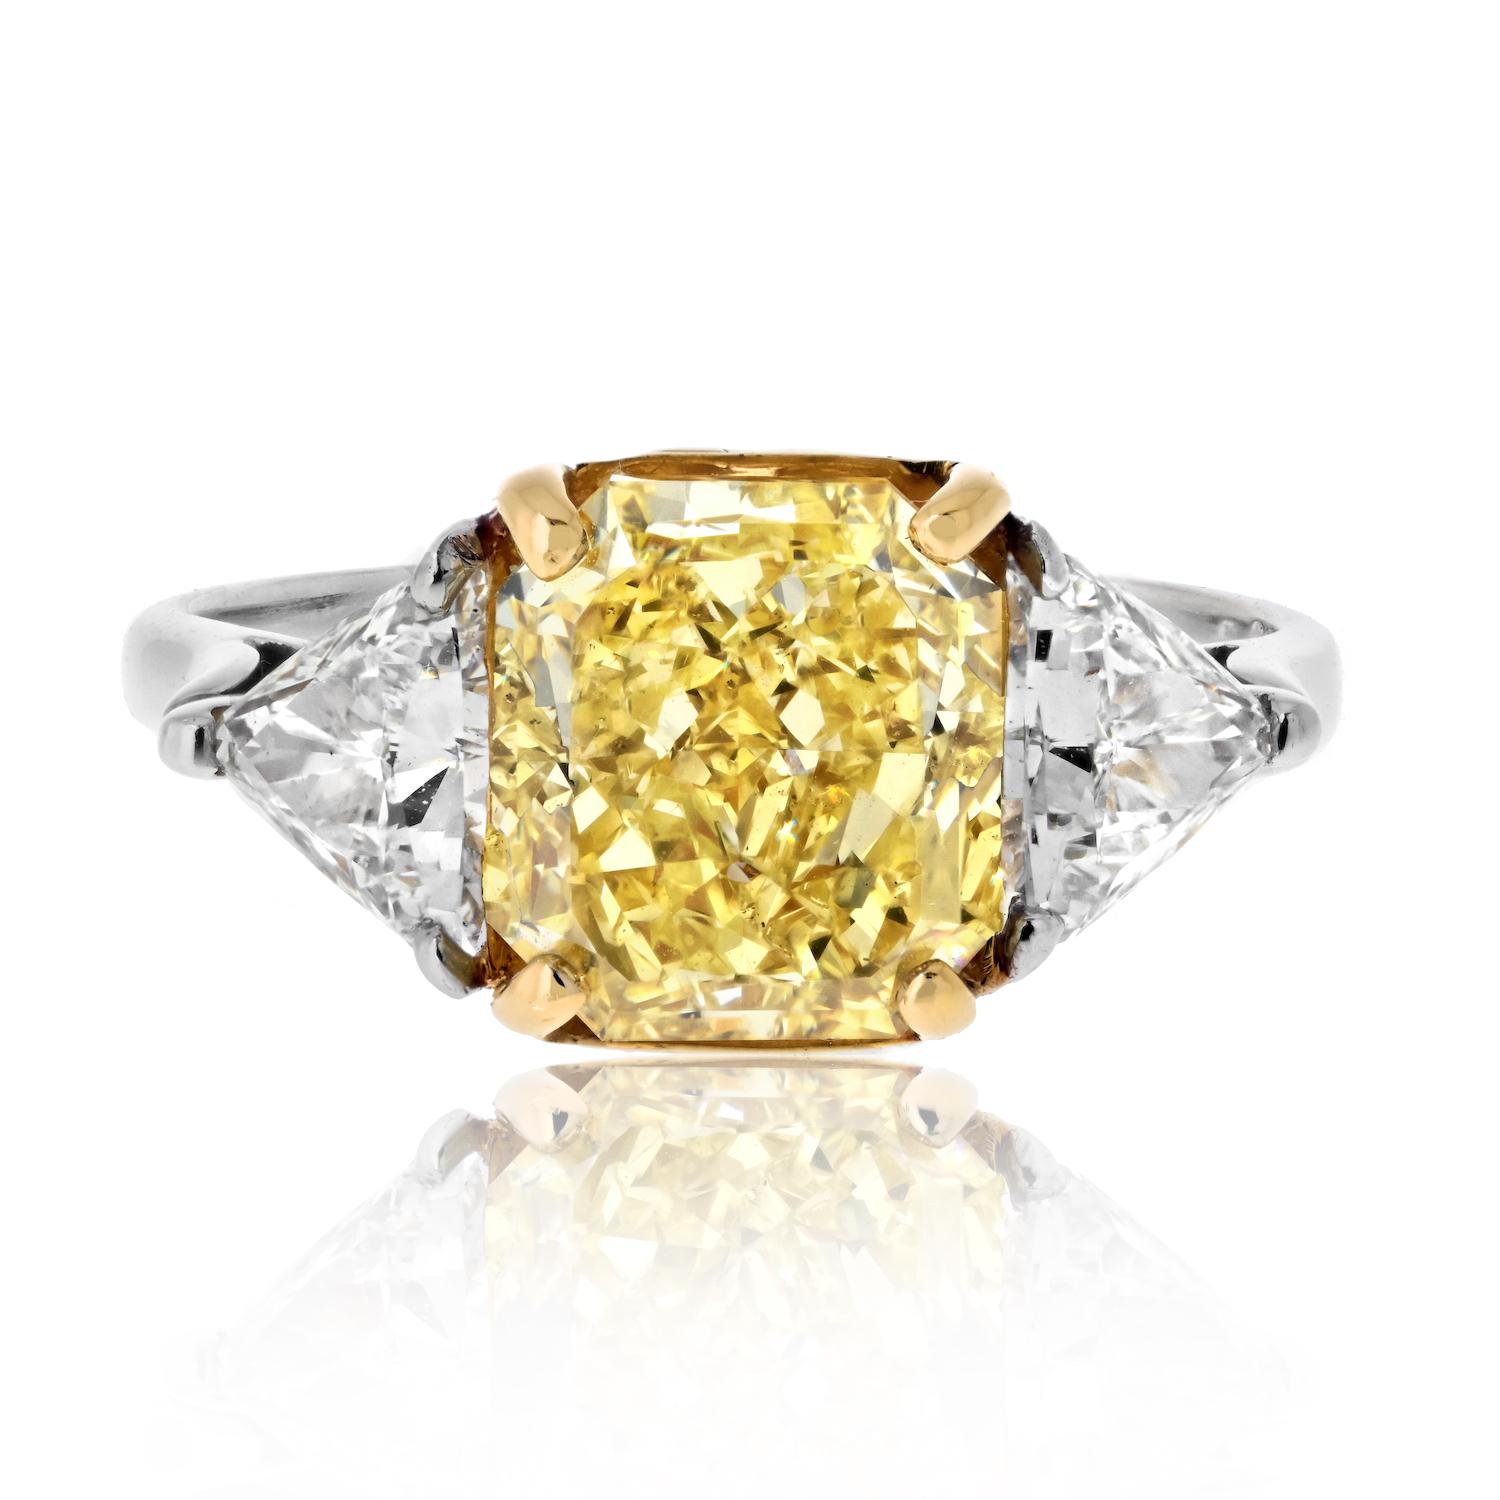 Illuminate your love story with this extraordinary 3.04ct Radiant Cut Fancy Intense Yellow Trilliant Cut Diamond Engagement Ring. The centerpiece, a radiant symbol of vibrancy, is a GIA certified Fancy Yellow Intense diamond, capturing the warmth of